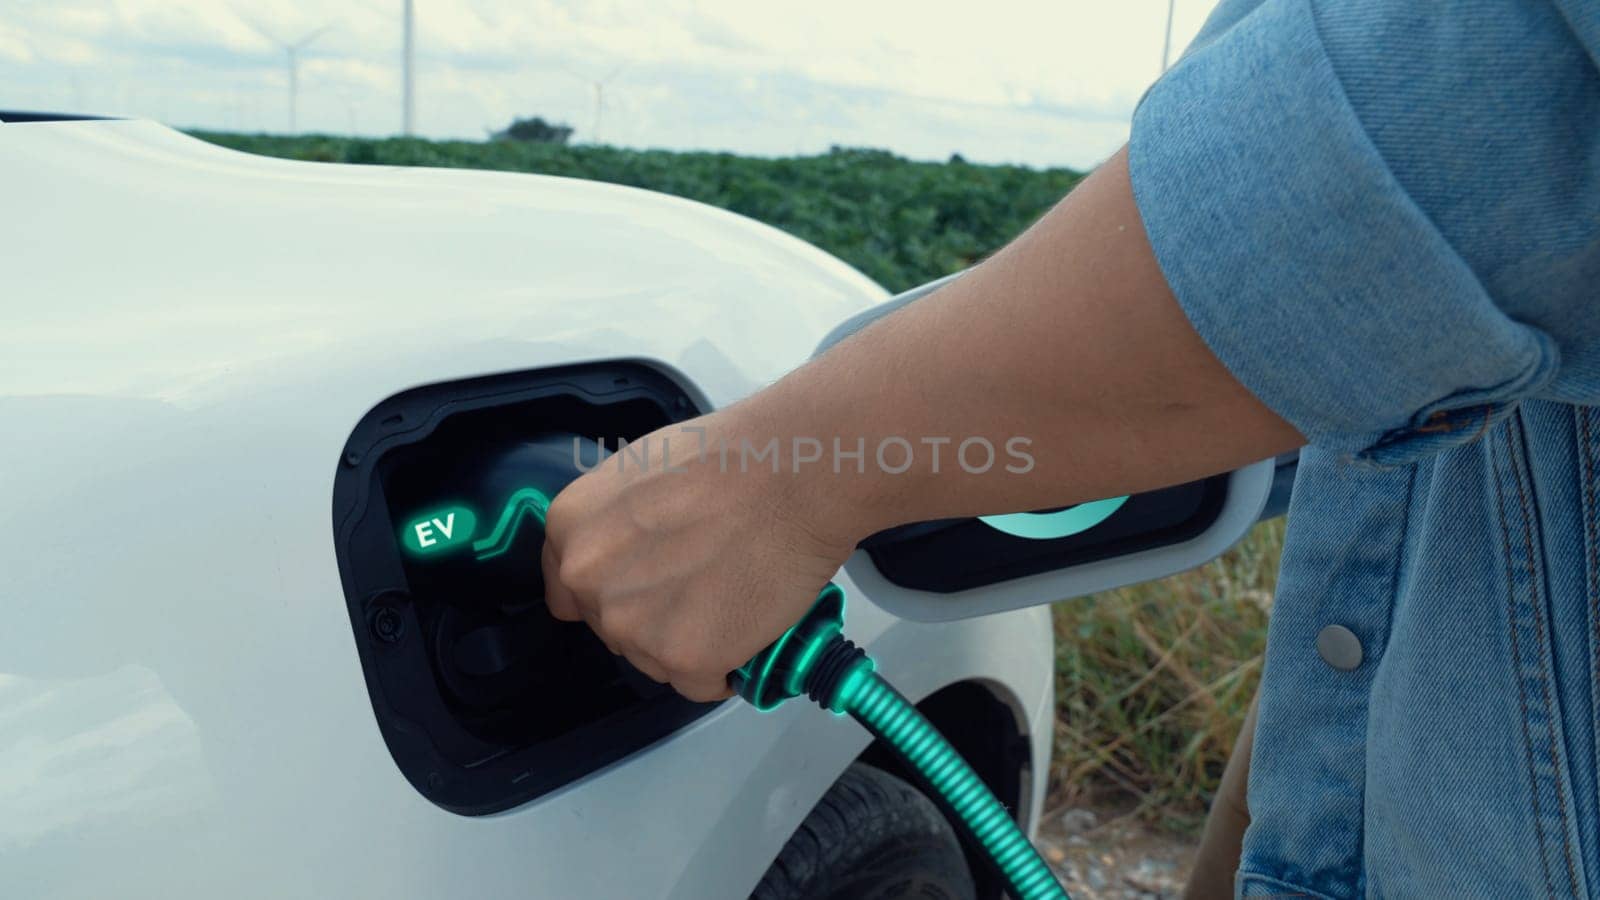 Hand insert EV charger and recharge electric car from charging station on nature and travel concept background. Technological advancement of alternative energy sustainability and EV car. Peruse